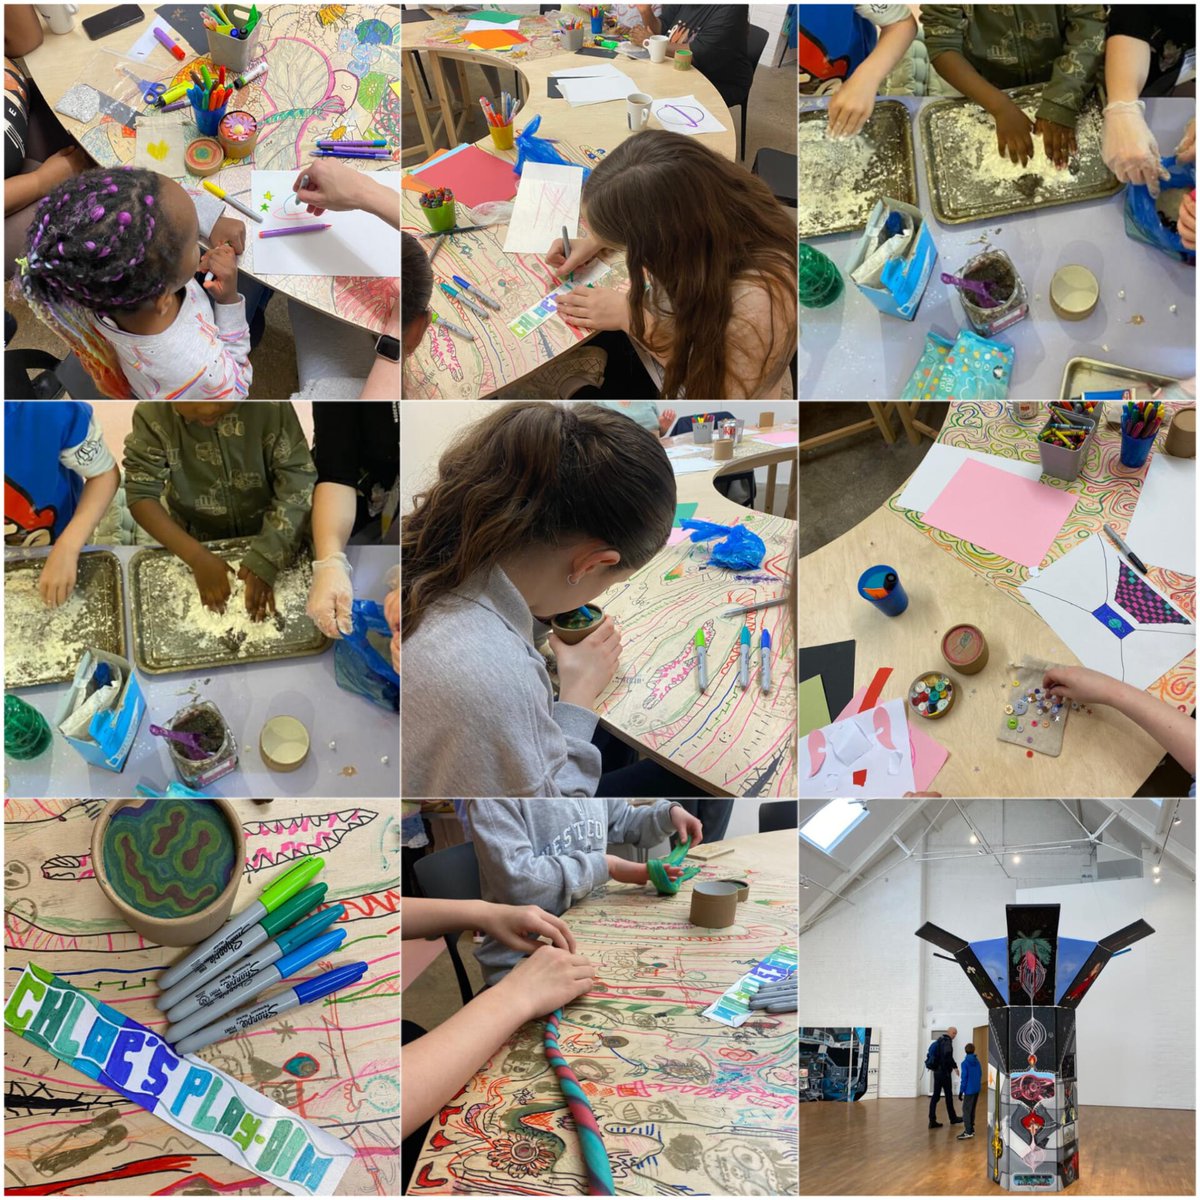 We had a great session at @mao_gallery on Saturday. We spent the day making our own slime & play-doh, as well as visiting the new exhibition at the gallery. The children enjoyed getting messy & making new friends. Lovely to see our regulars & also some new families who came